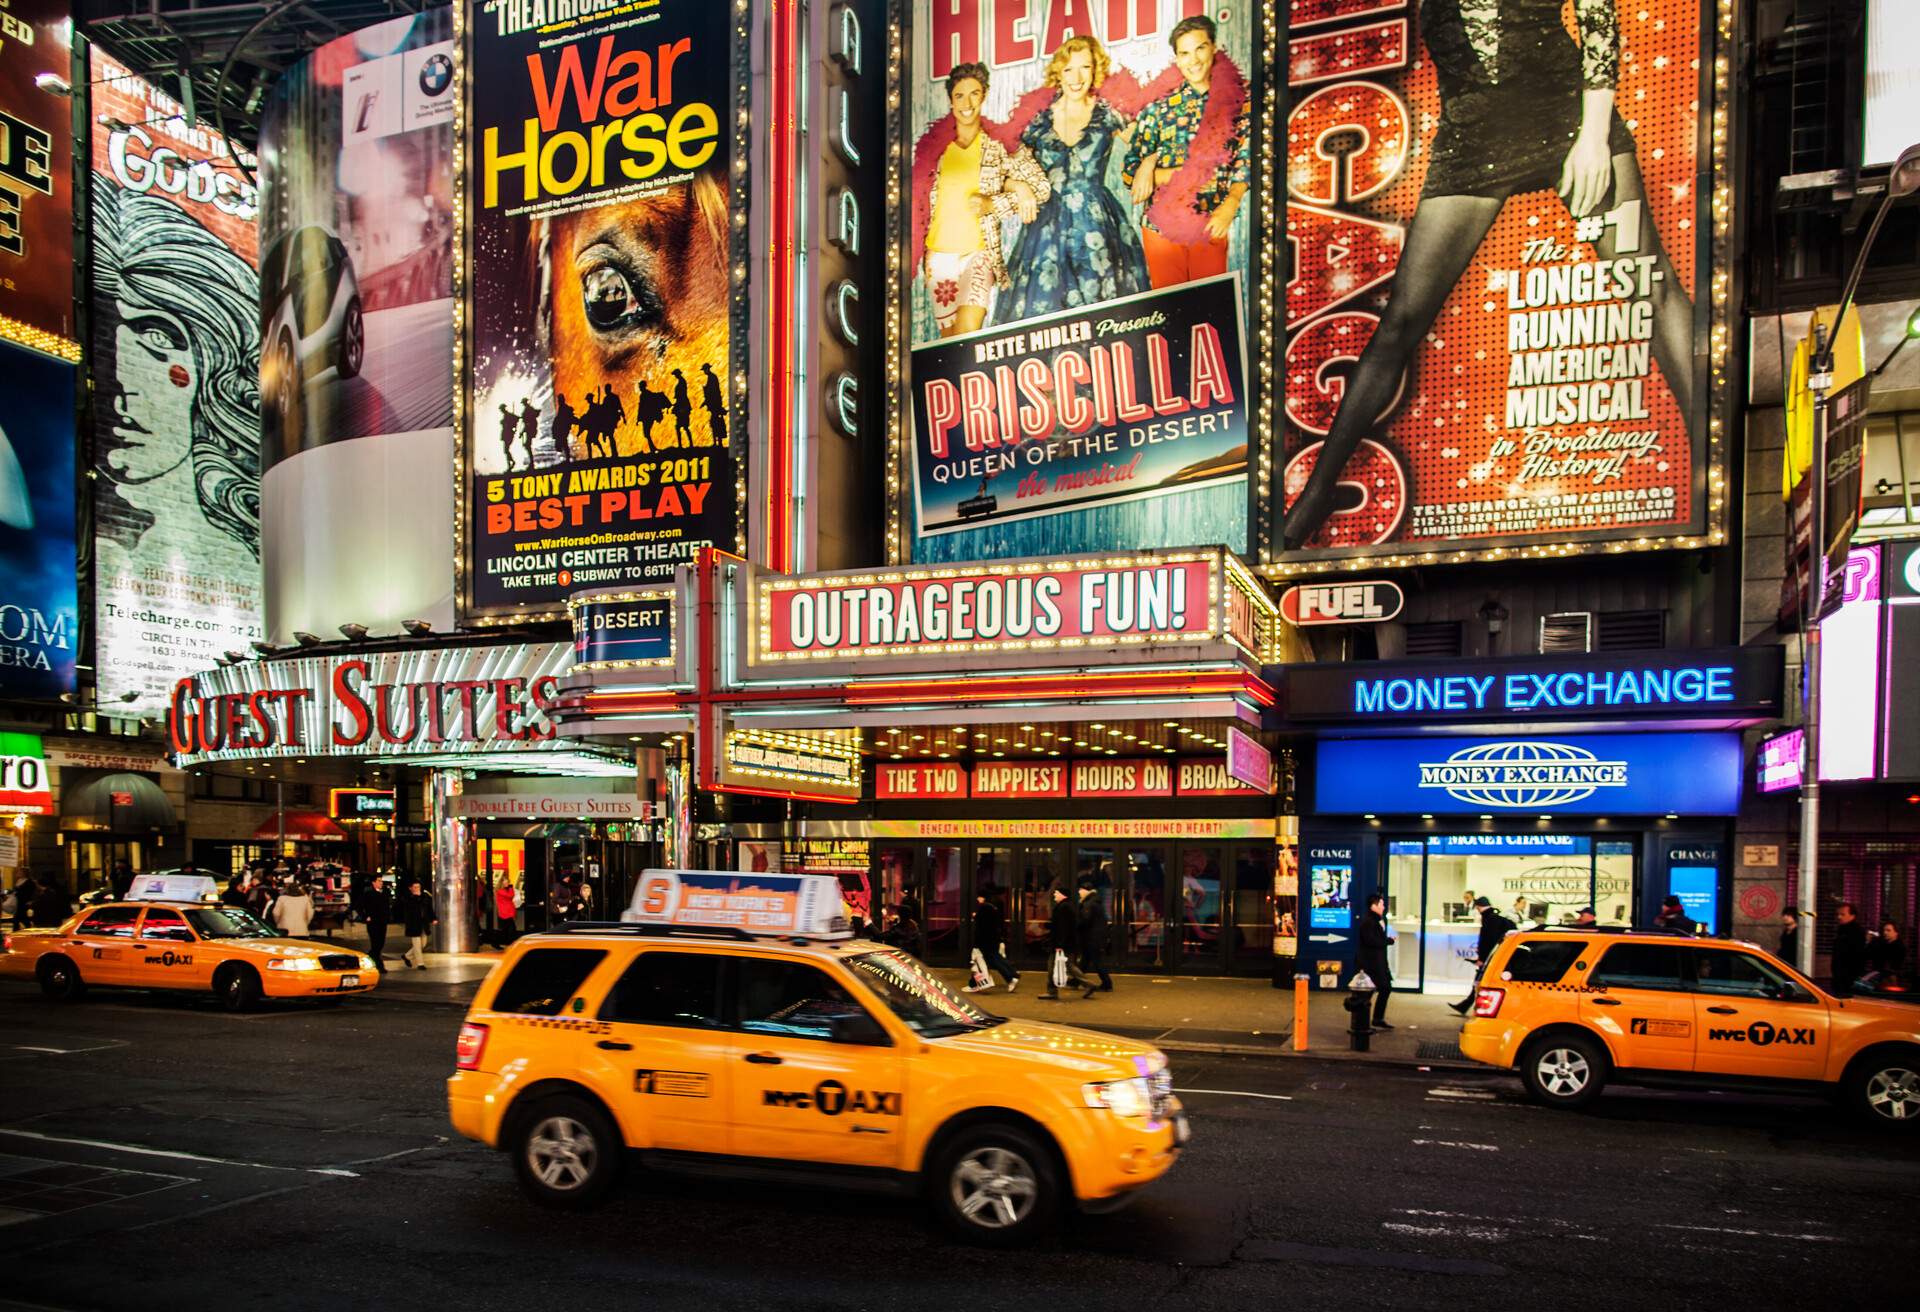 Iconic Broadway theatres in the heart of Times Square, New York City, come alive with dazzling poster ads, as yellow taxis in the foreground add a vibrant touch to the bustling scene.